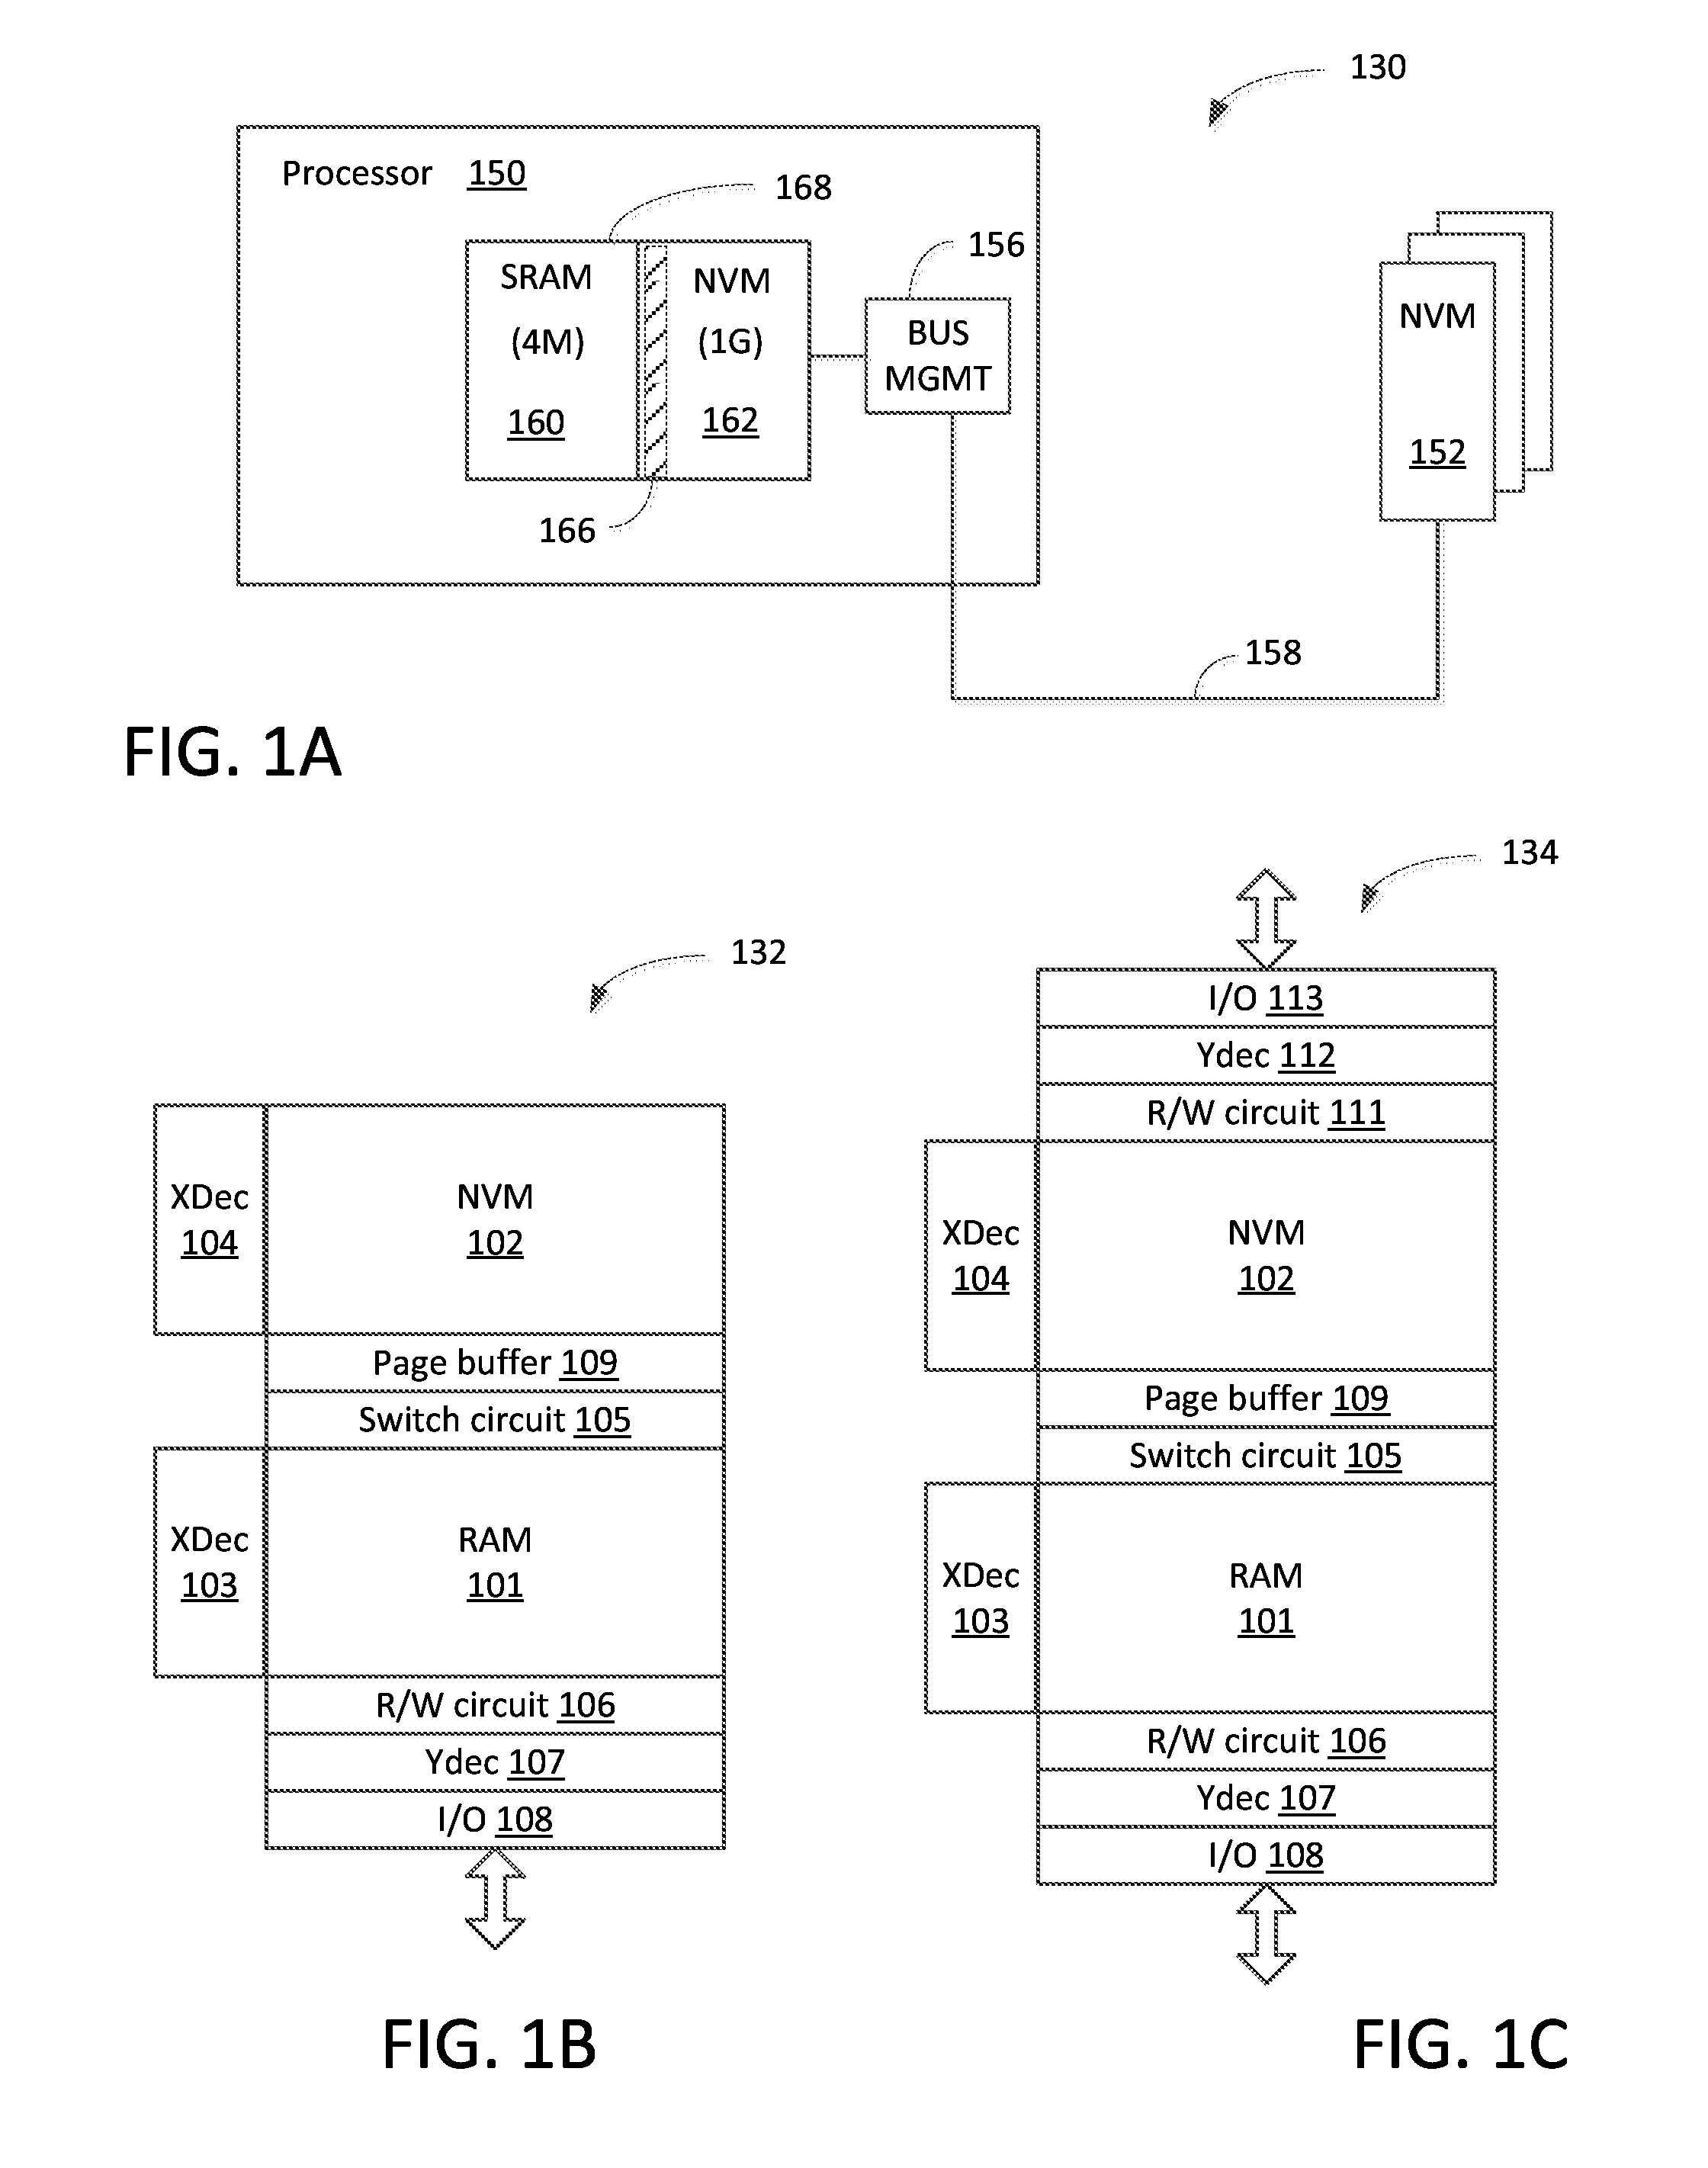 Method and apparatus for providing multi-page read and write using SRAM and nonvolatile memory devices